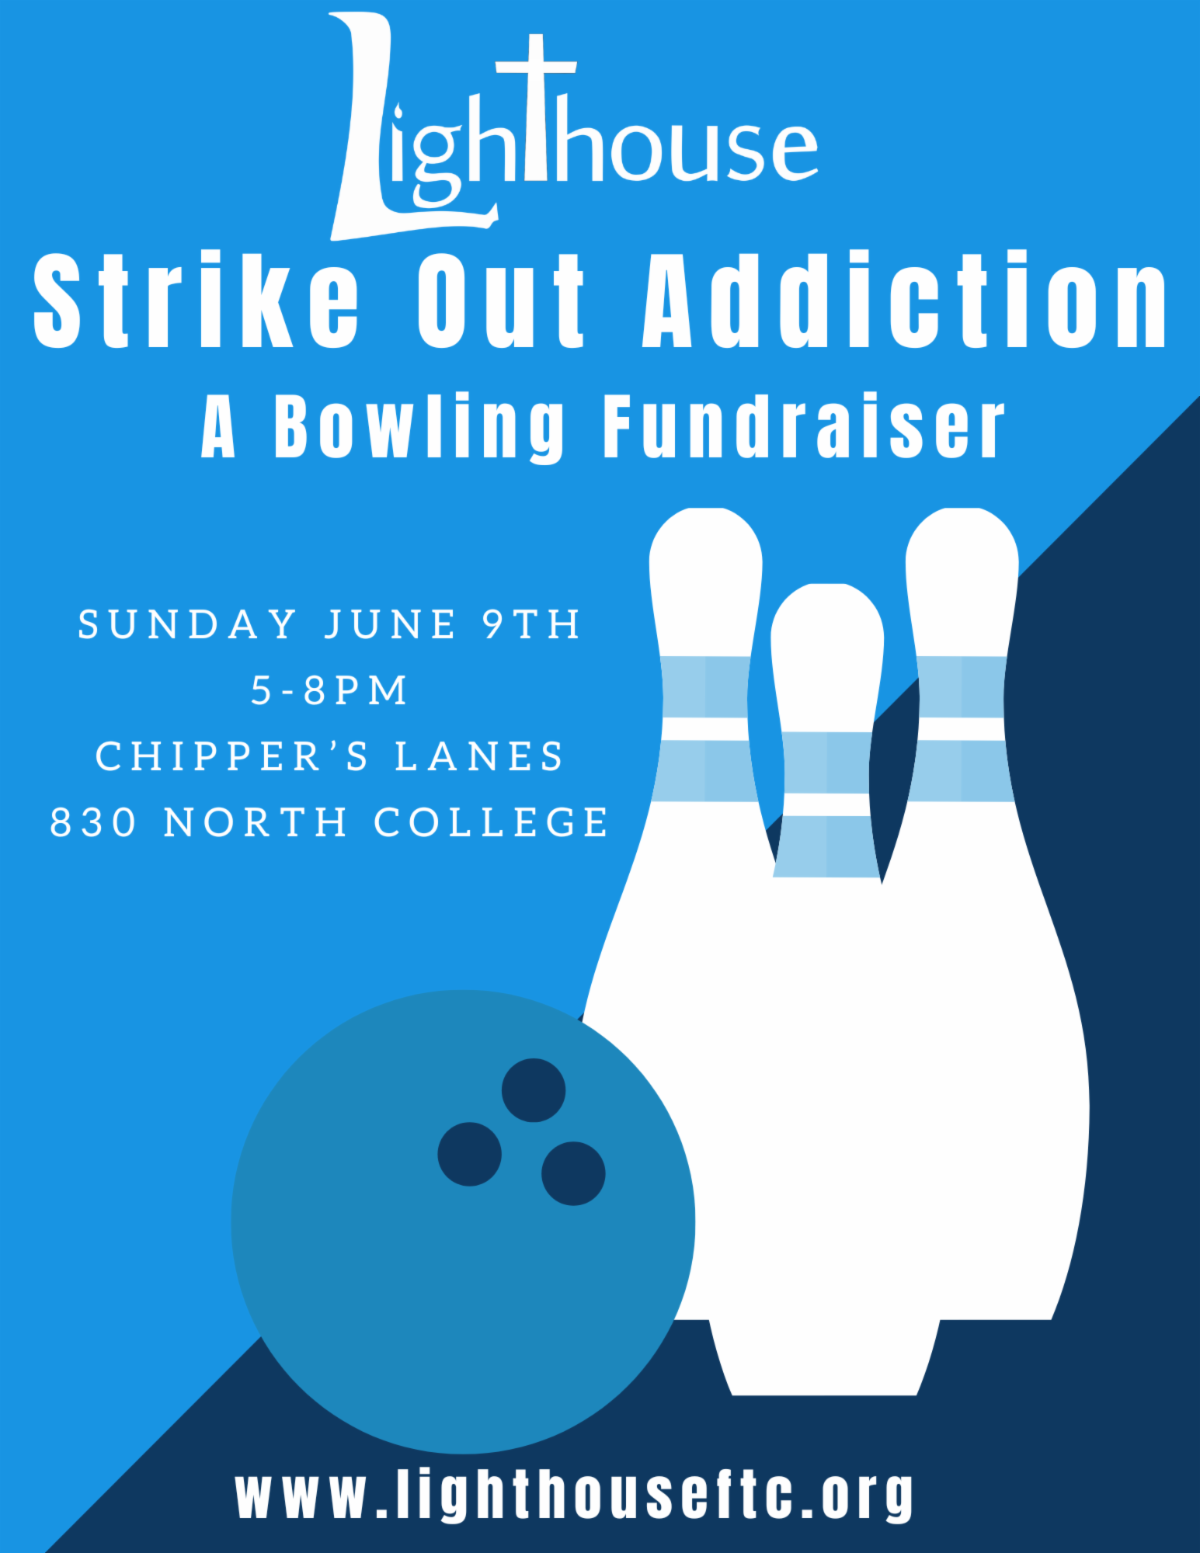 Strike out Addiction Event Flyer